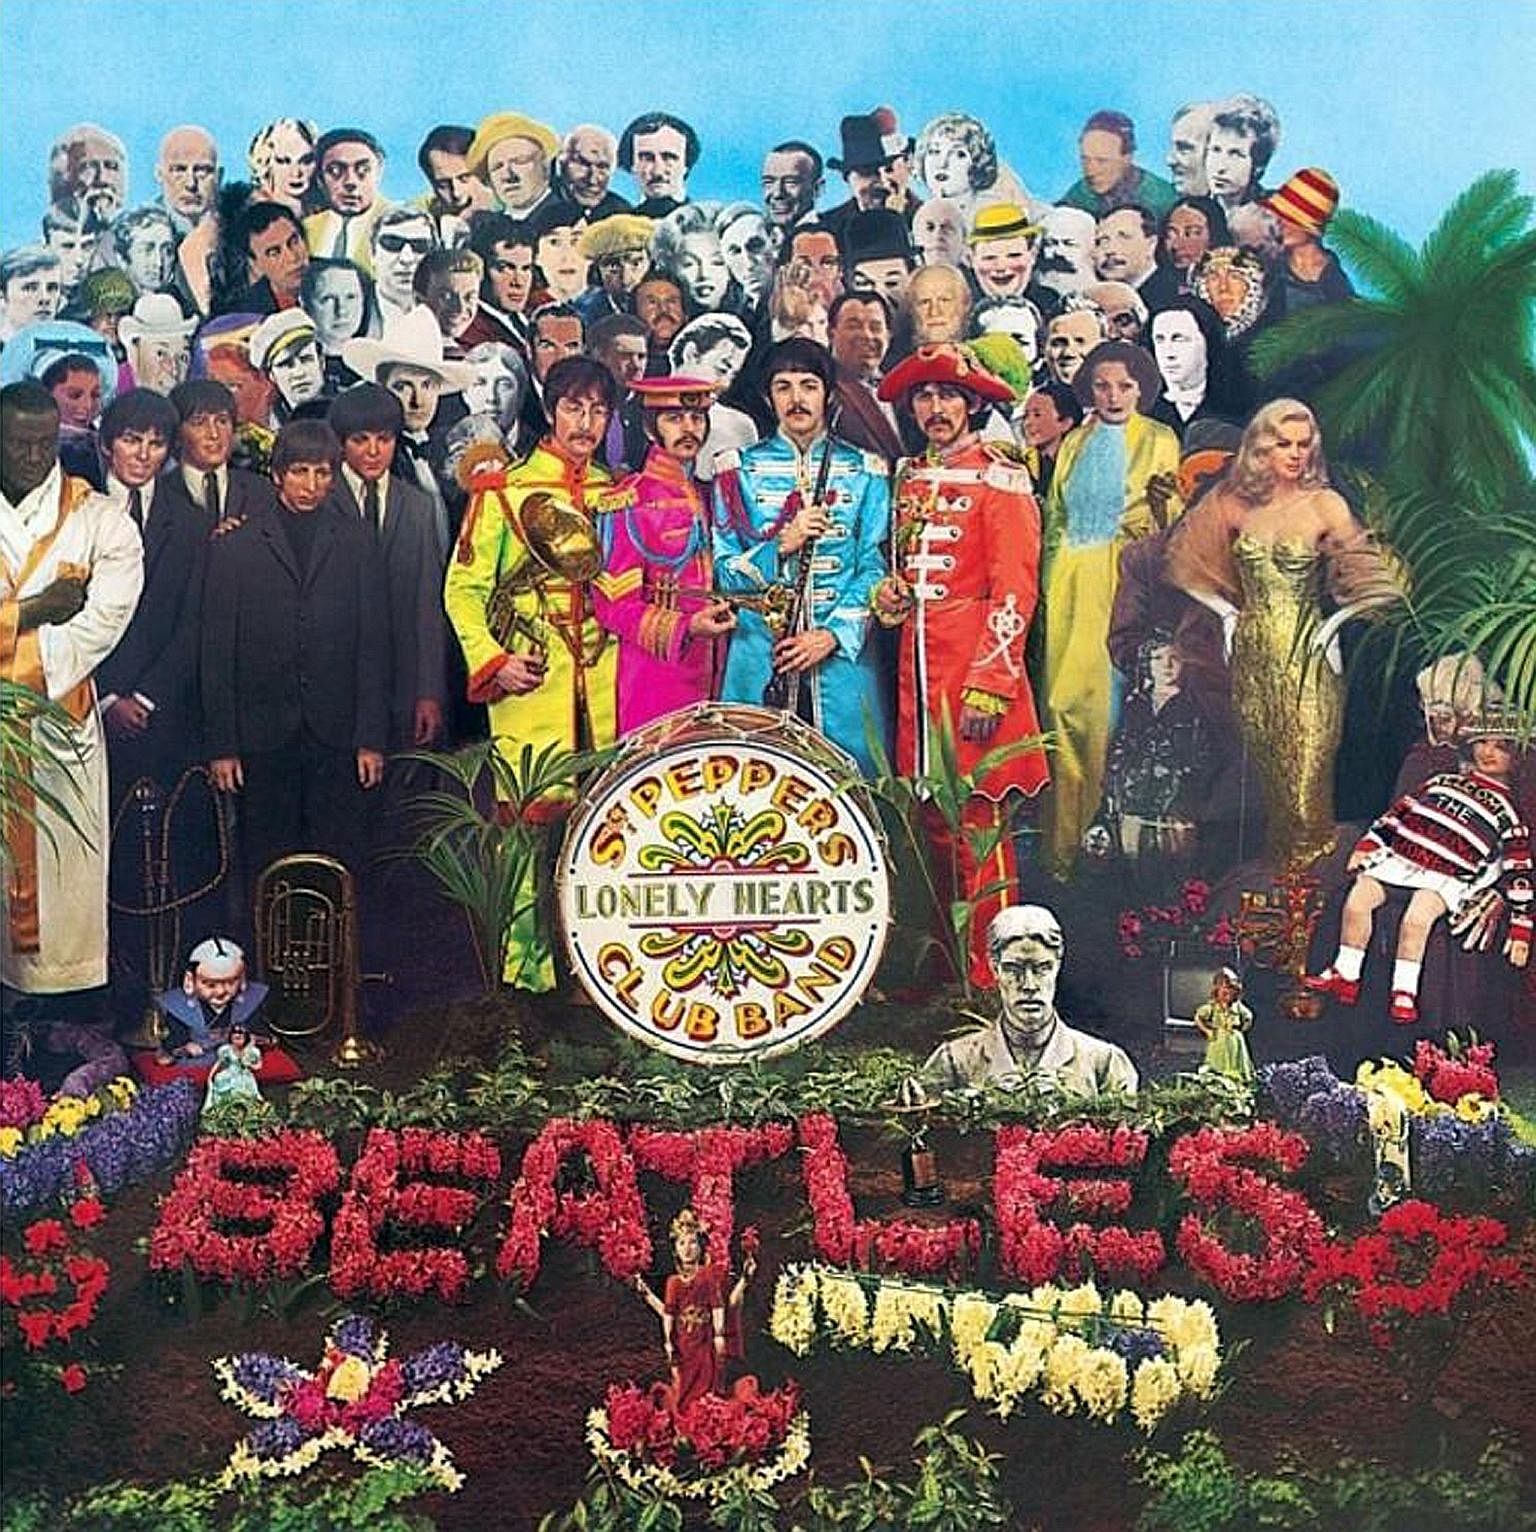 The 50th- anniversary deluxe version of The Beatles' Sgt Pepper's Lonely Hearts Club Band has been remastered to give the album a broader soundstage and crisper detail, giving more separation to individual voices and instruments.